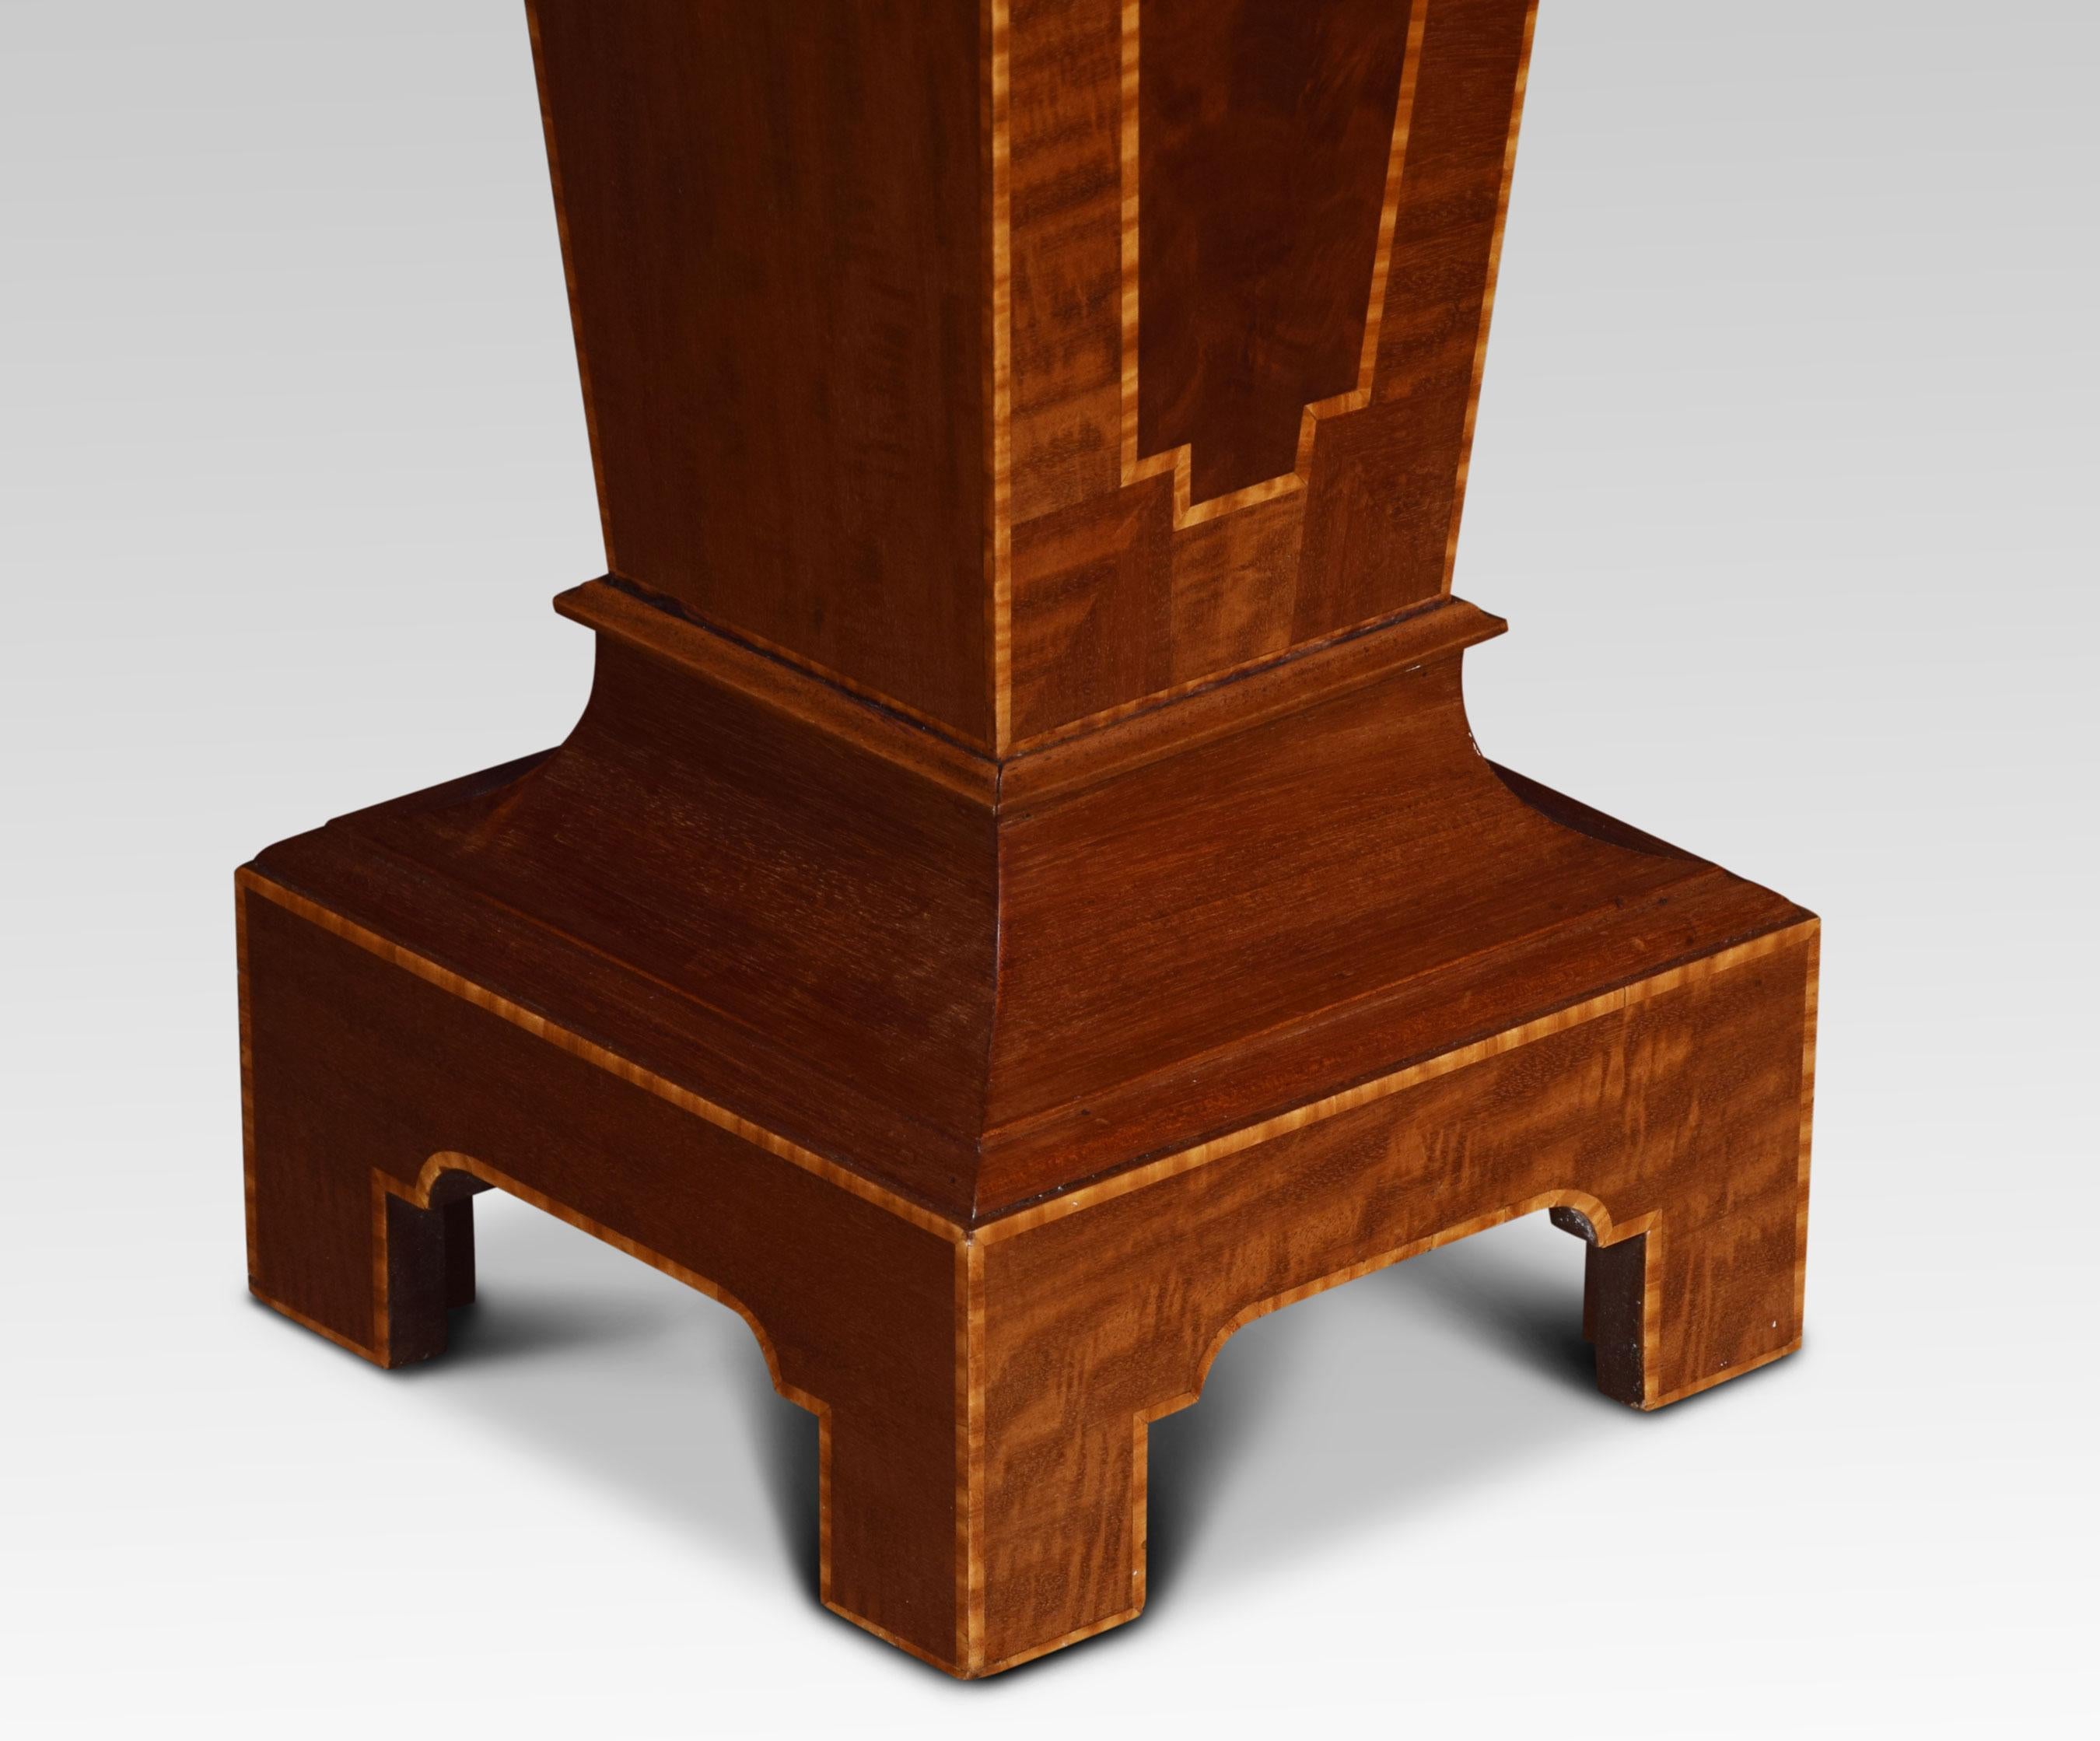 British Mahogany Pedestal Torchiere Stand For Sale